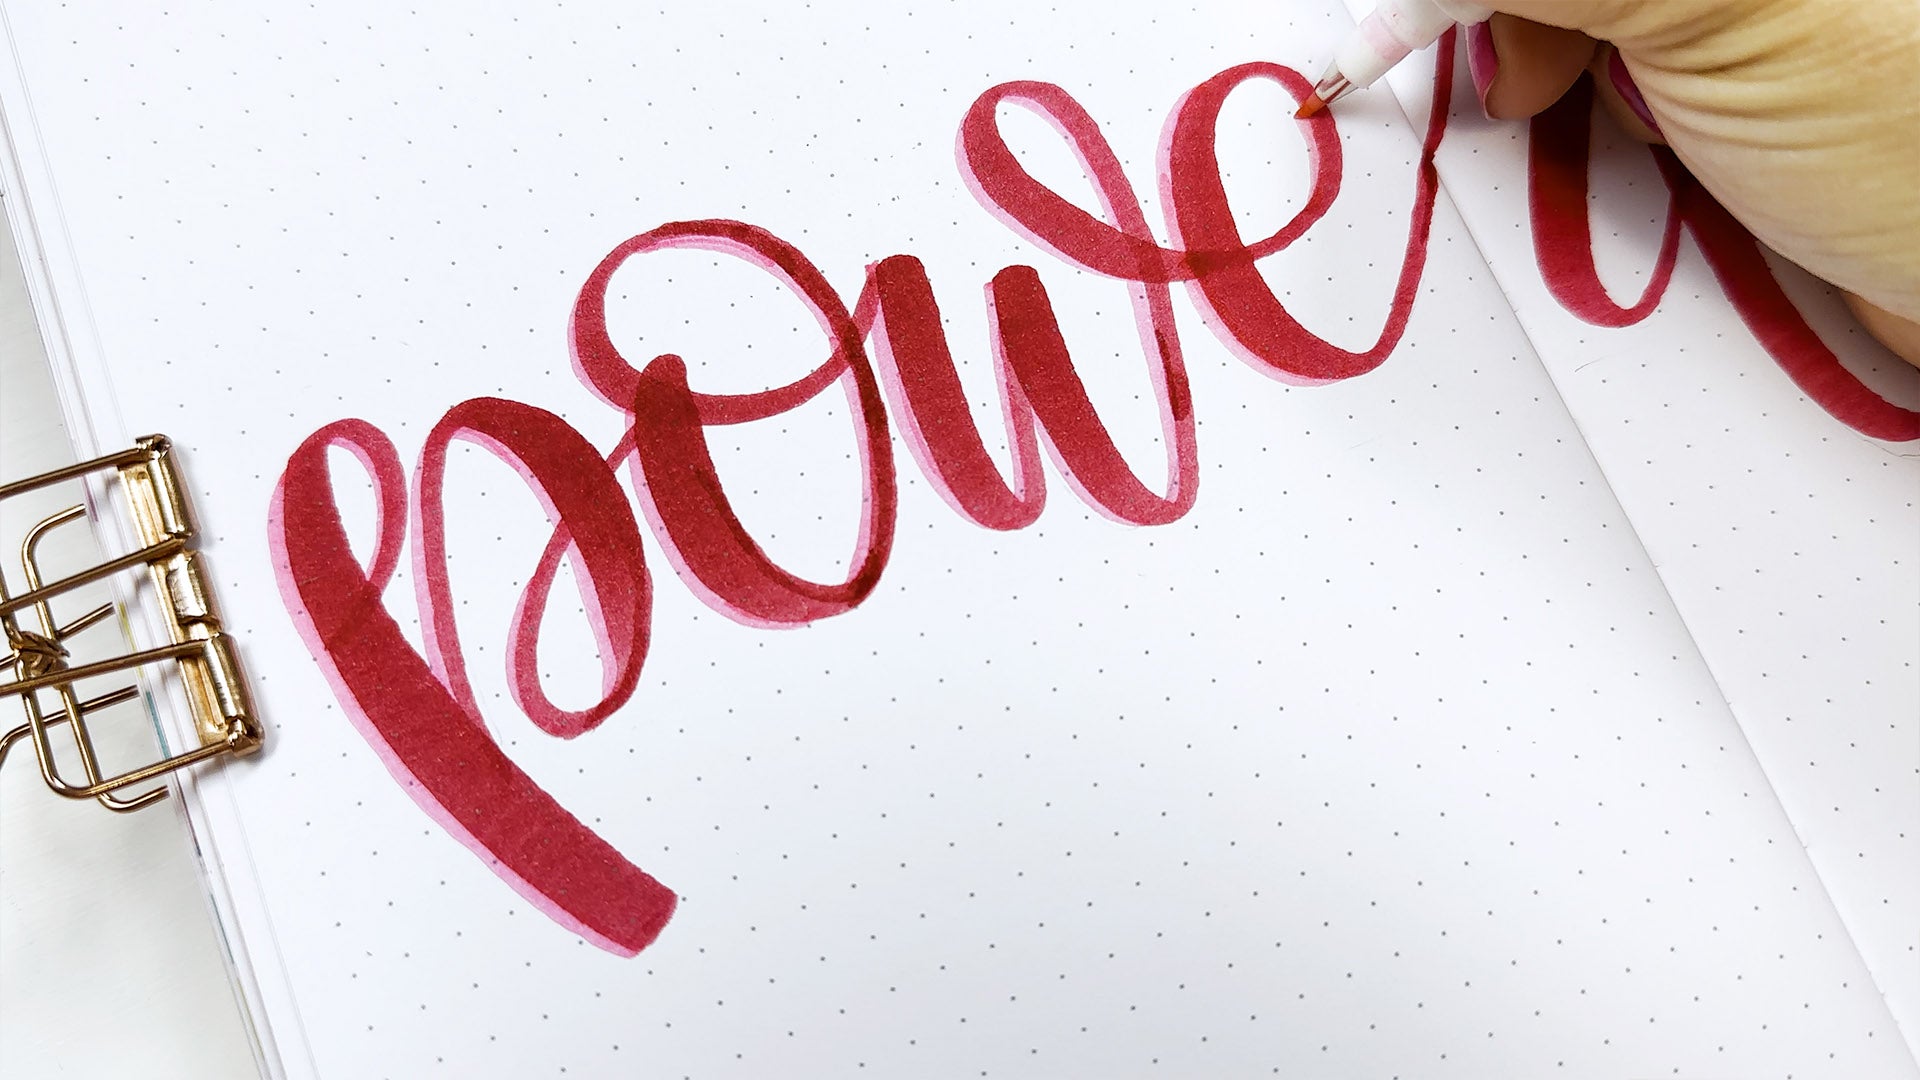 Adding a shadow to your lettering